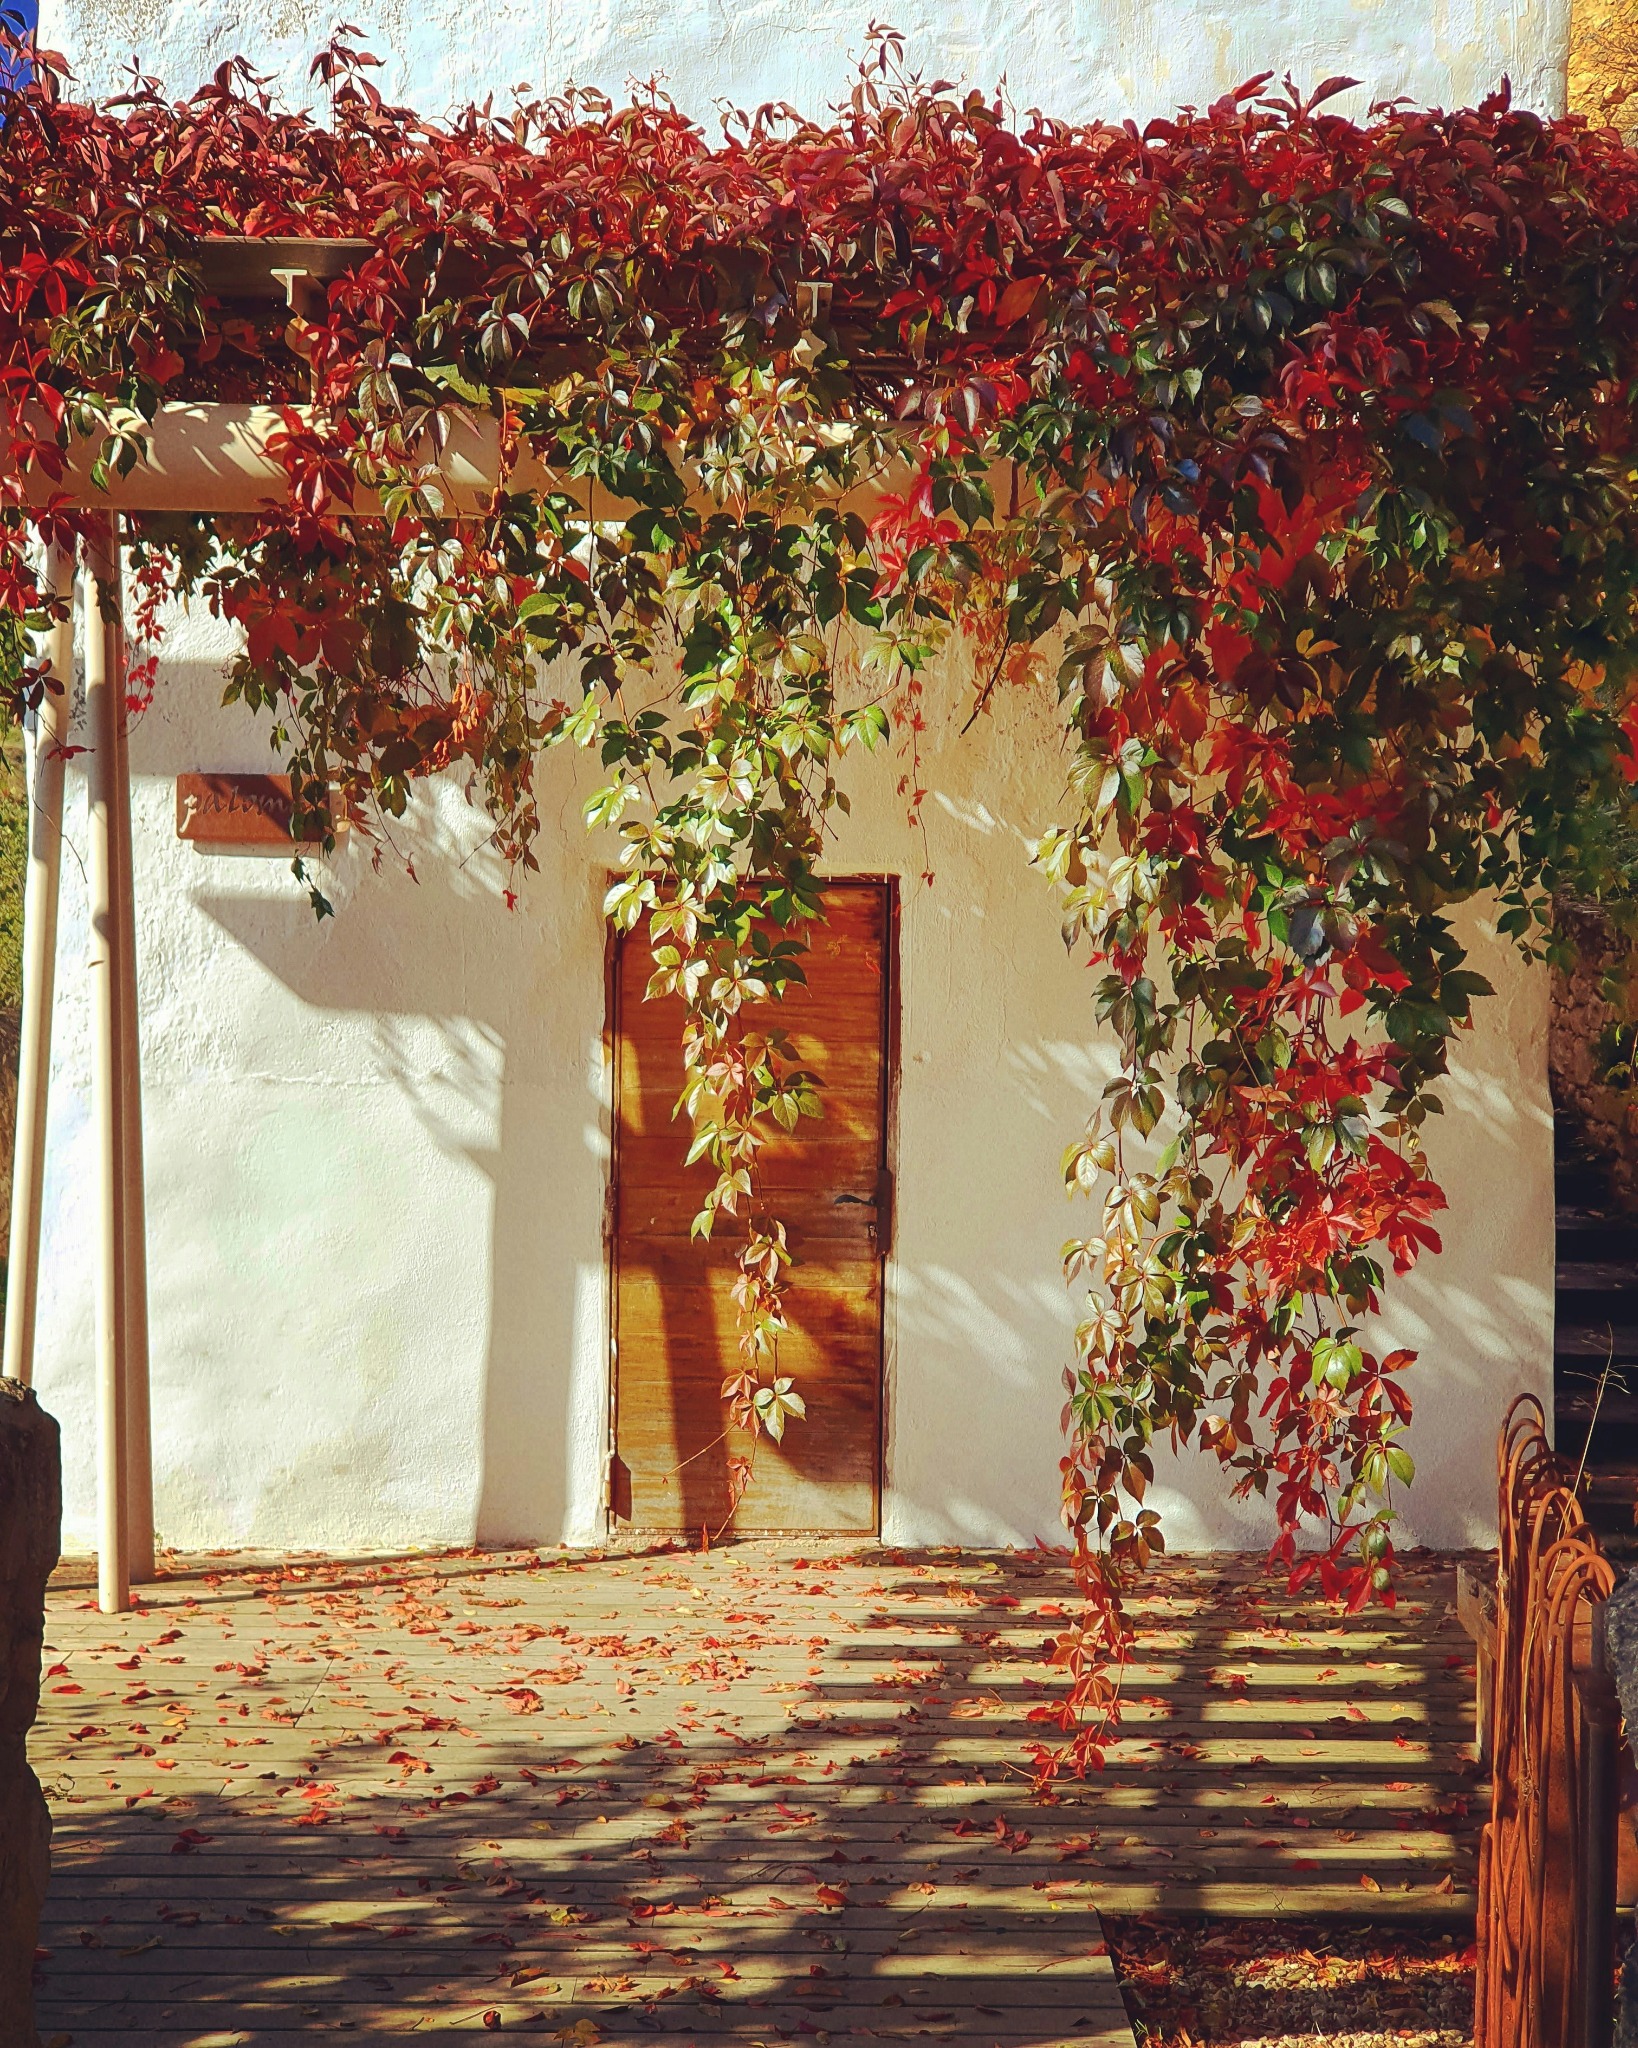 Autumn leaves covered patio